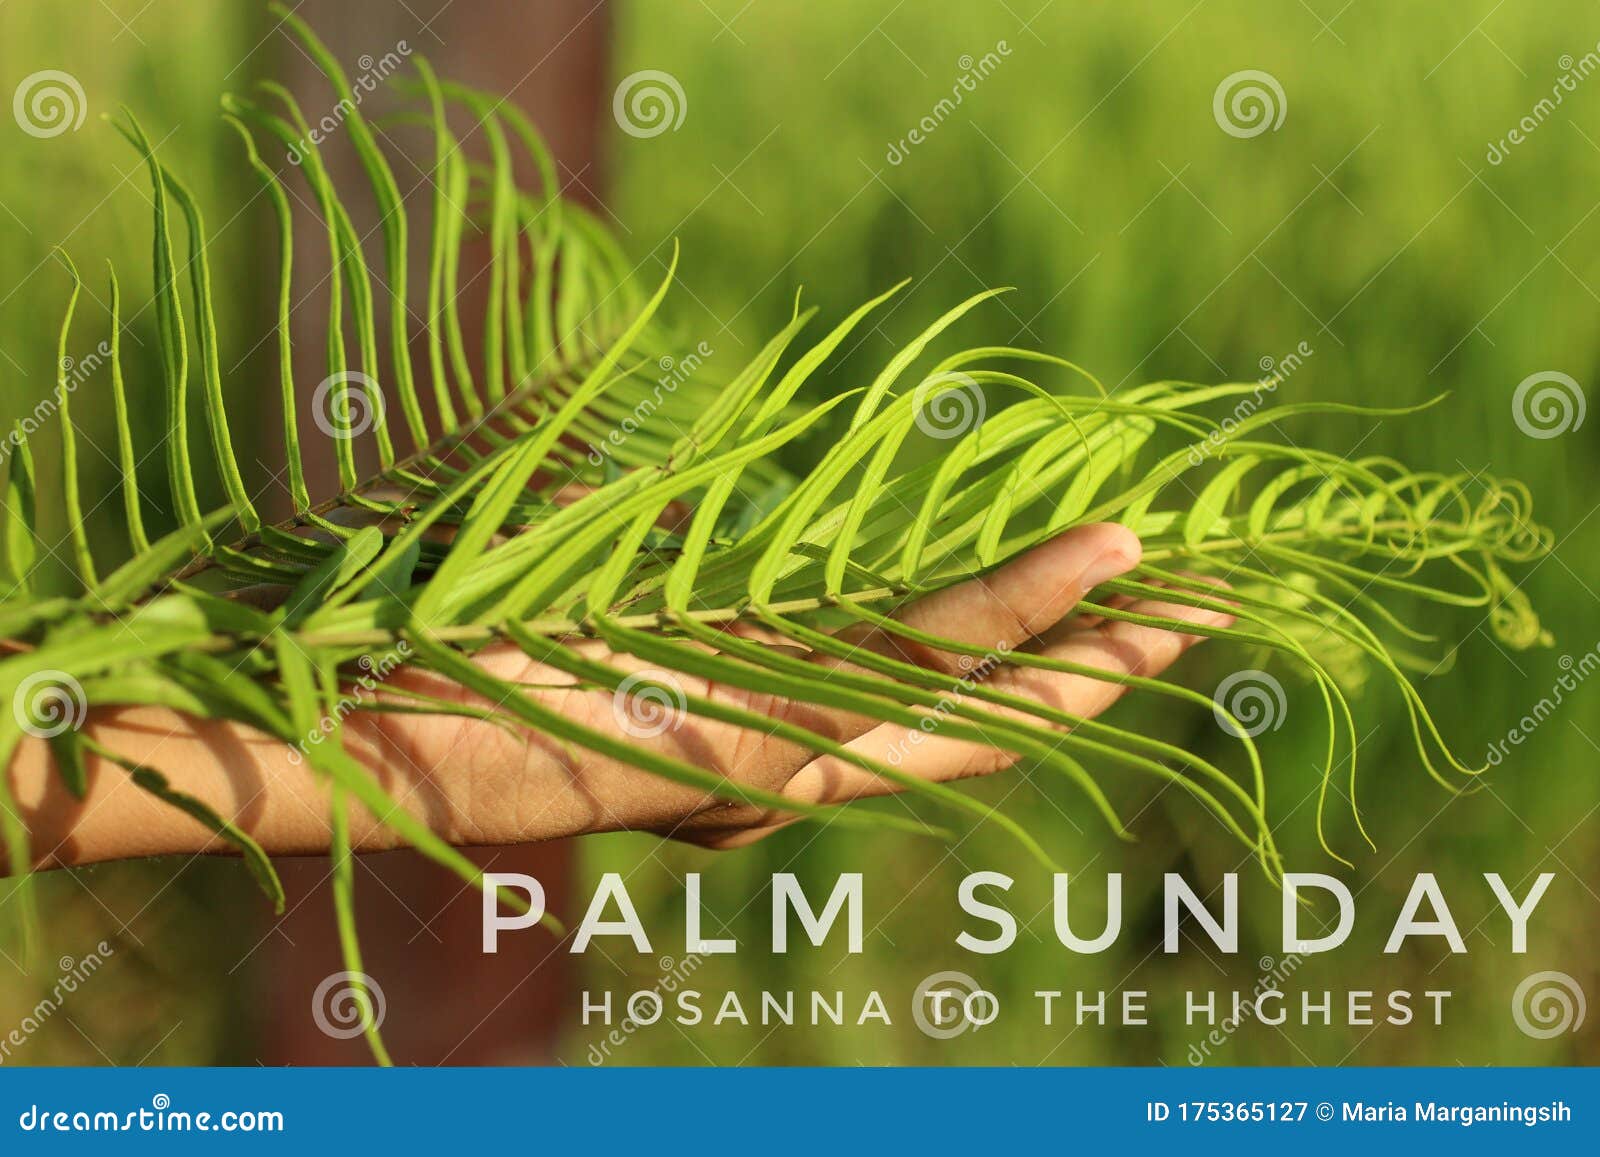 palm sunday - hosanna to the highest. palm sunday concept with green fern or palm leaf in hand on blurry background.